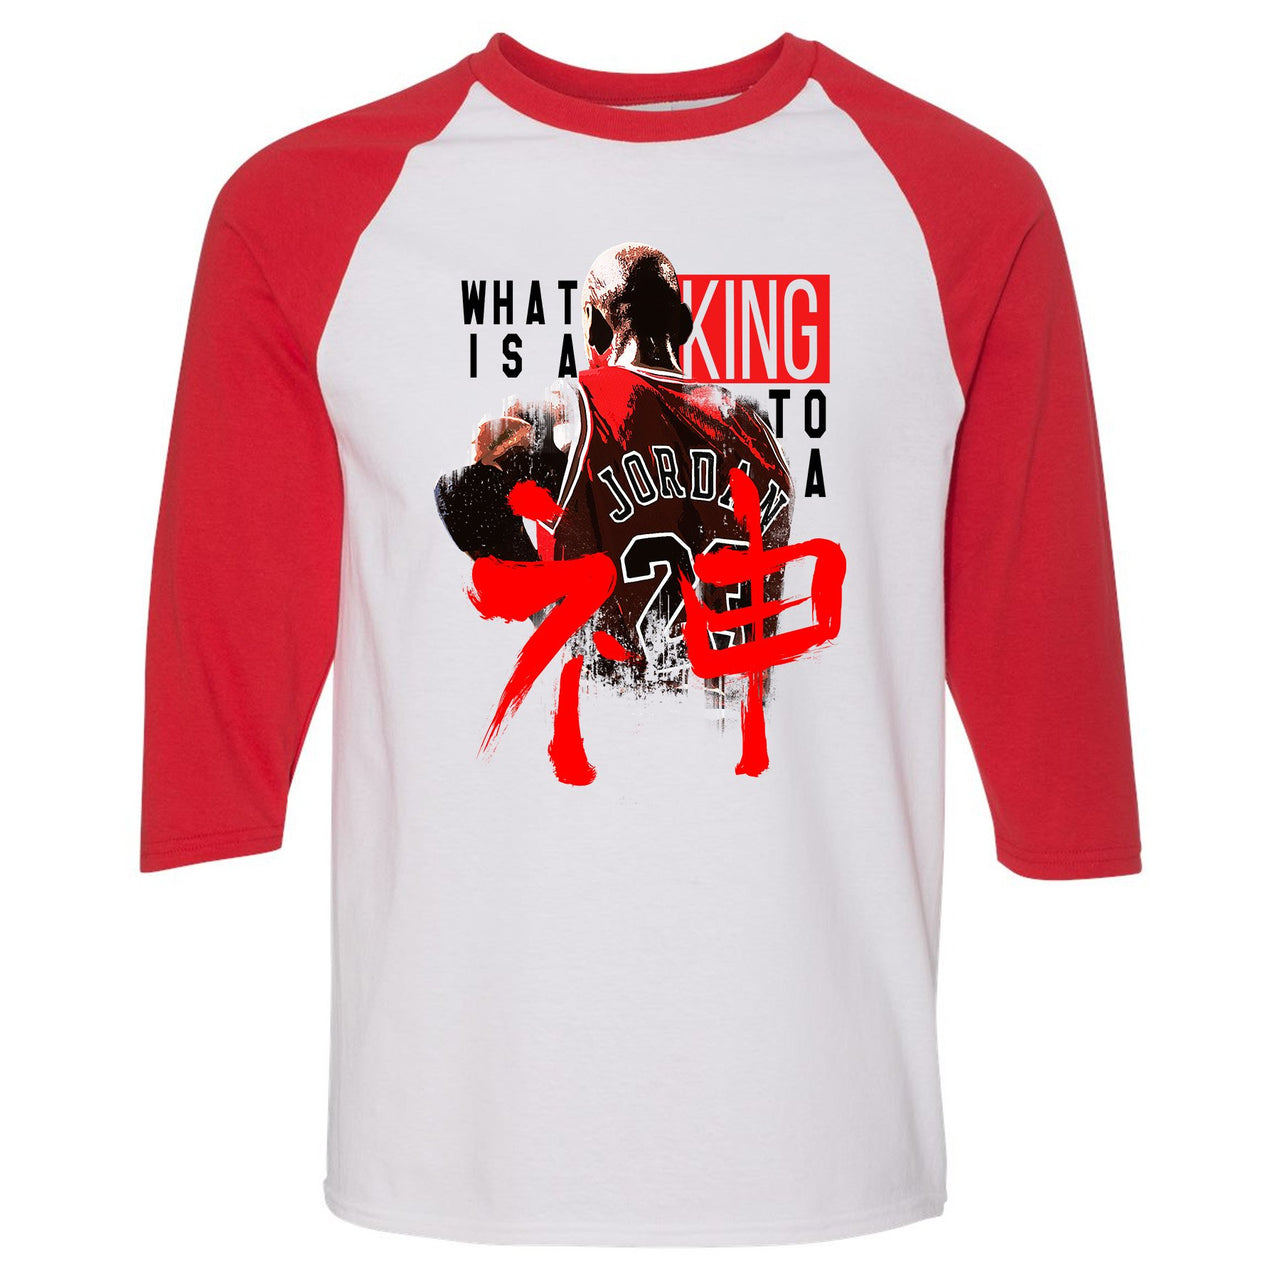 Reflections of a Champion 7s Raglan T Shirt | What Is A King To A God, White and Red